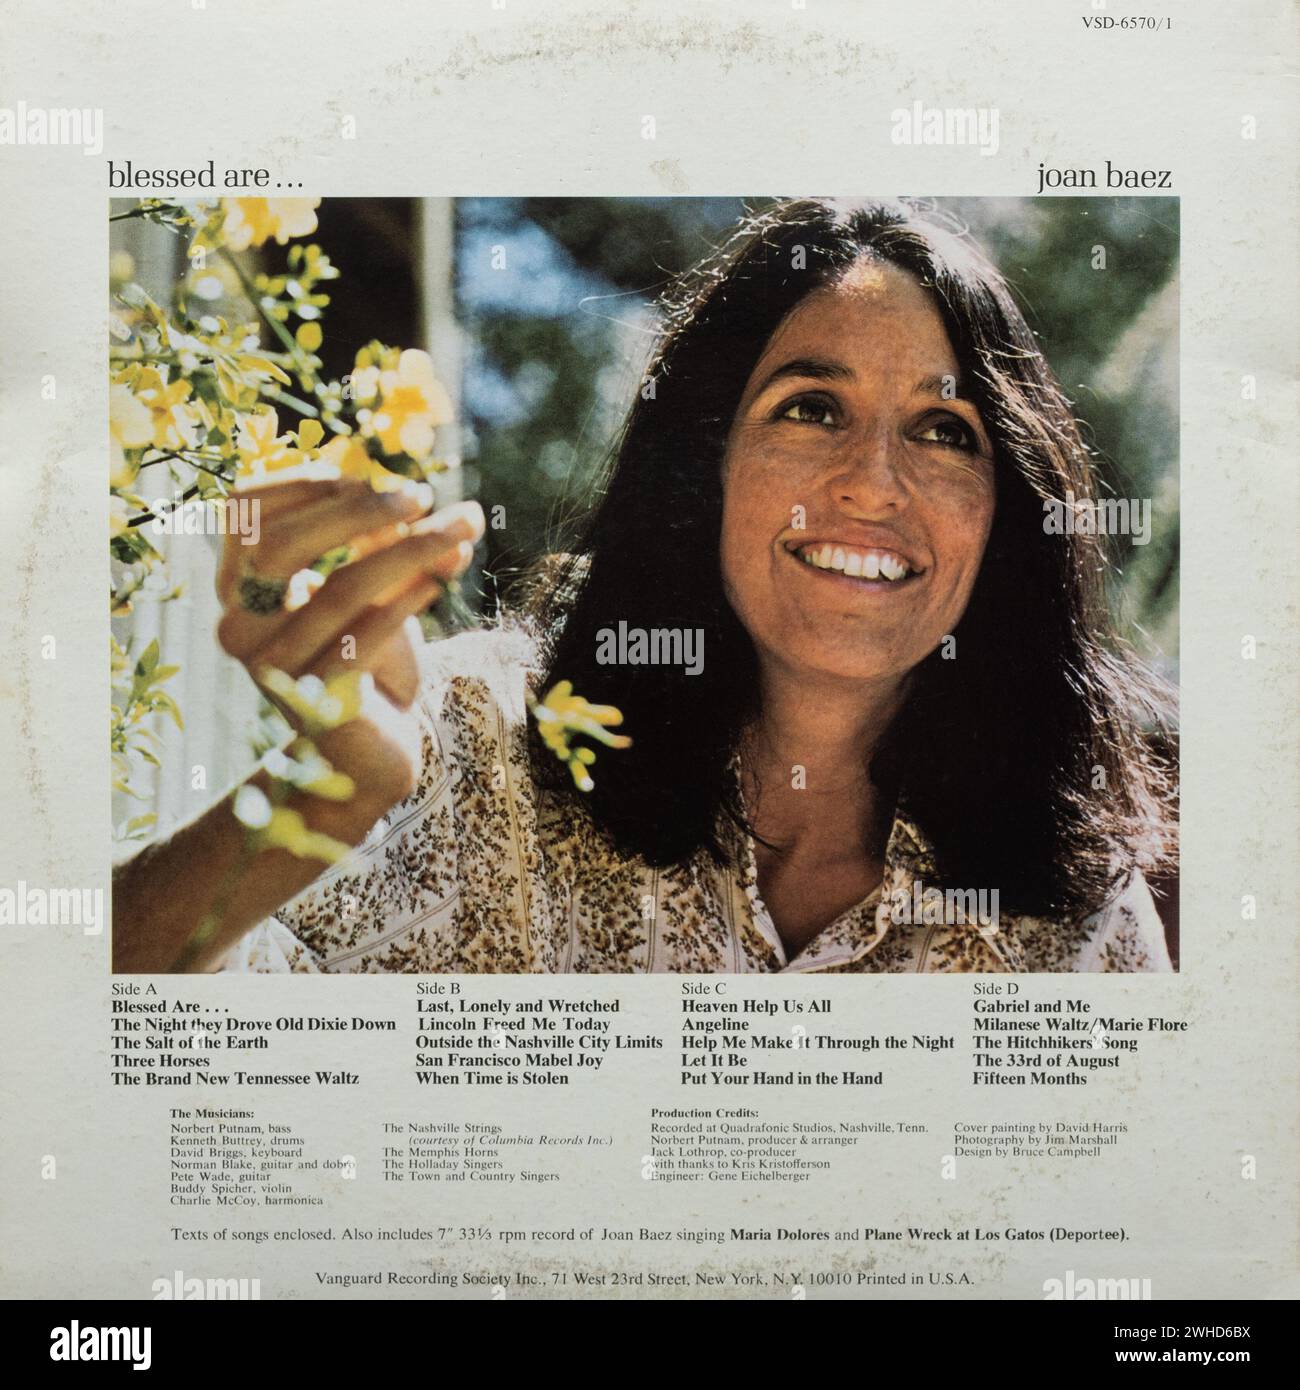 Blessed Are..., studio album by Joan Baez released in 1971, vinyl record cover by the American singer songwriter Stock Photo